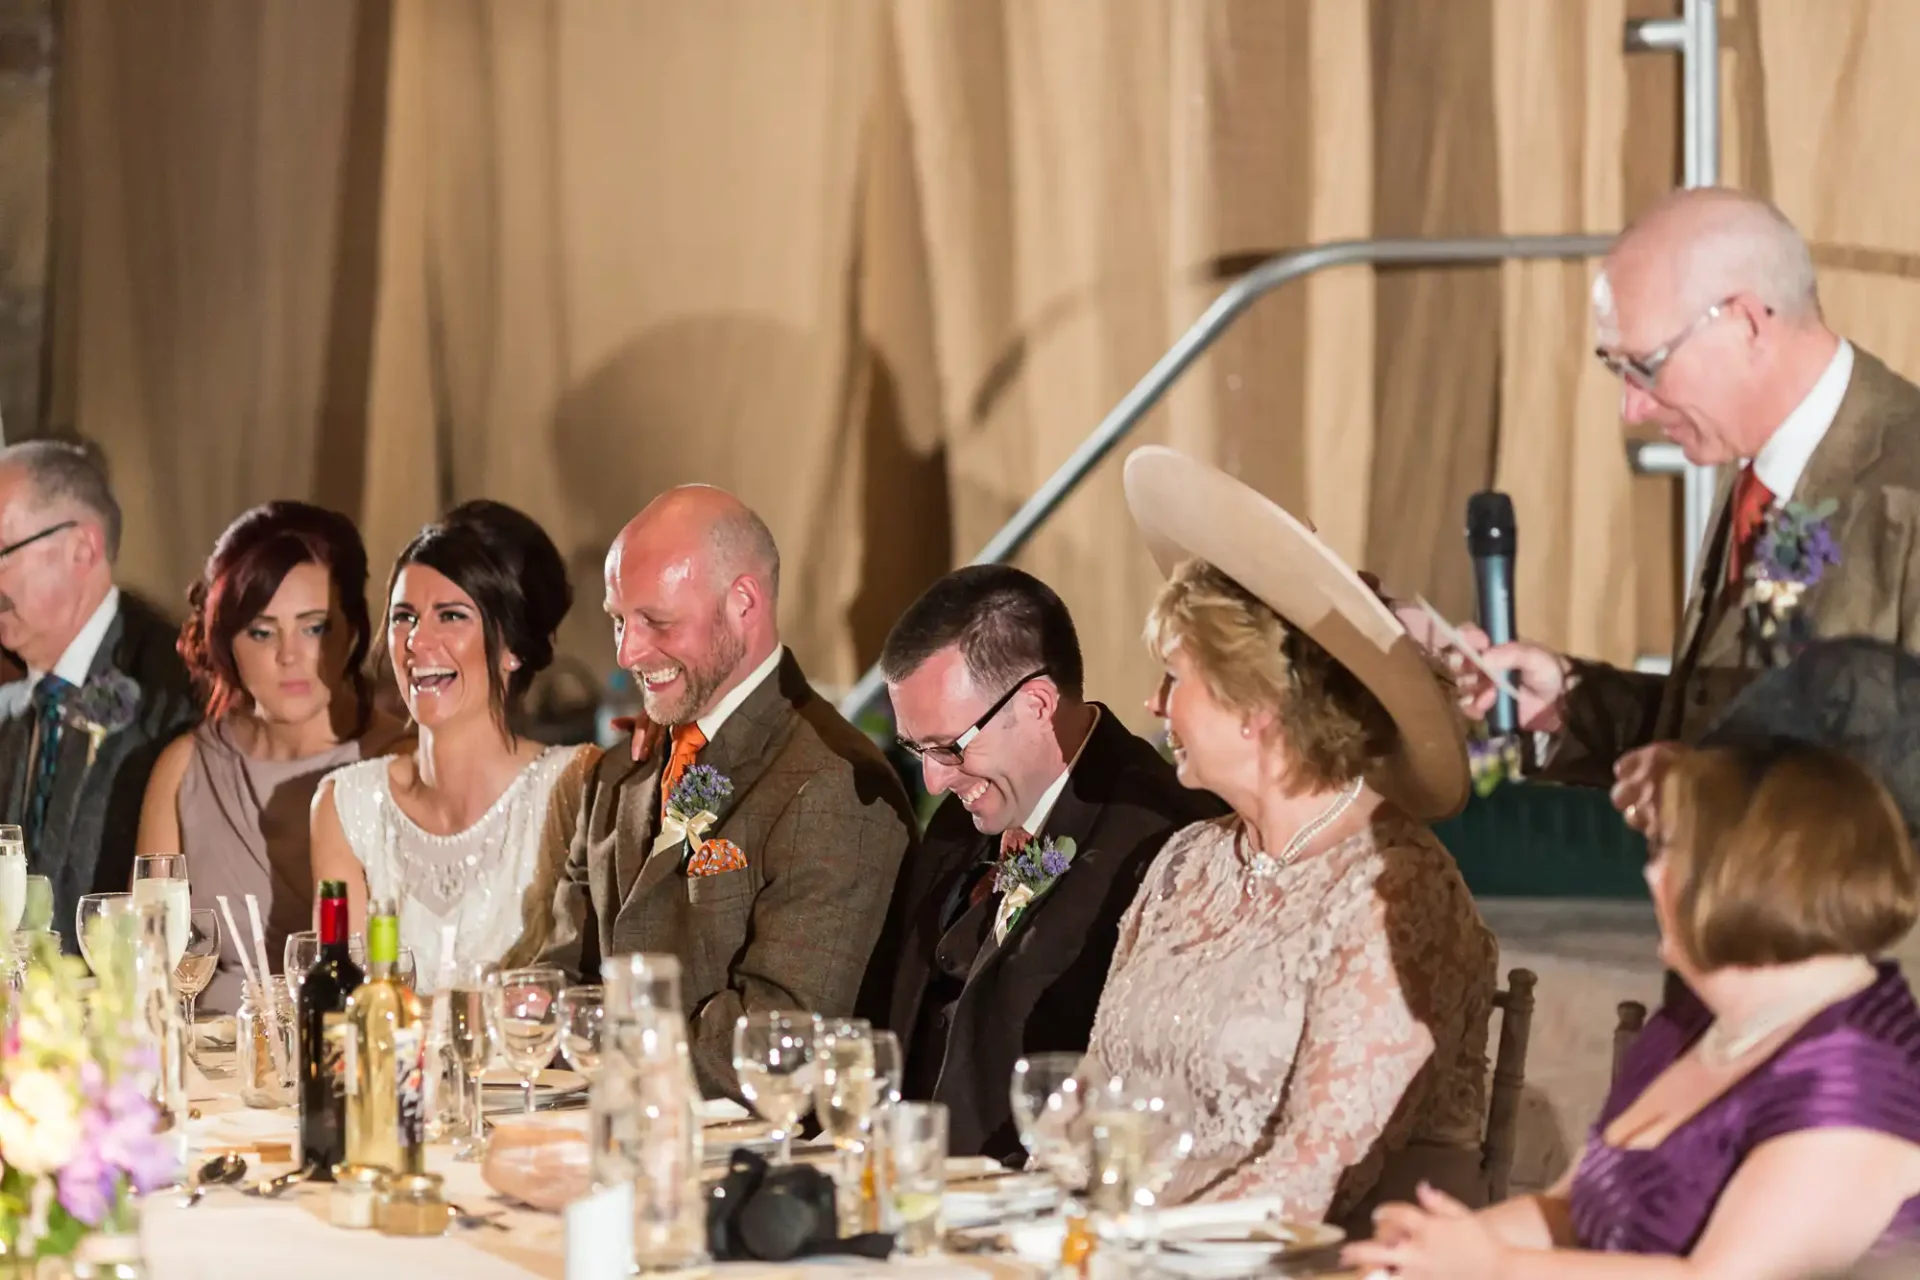 A joyful wedding reception scene with guests laughing around a dinner table, elegantly dressed, including a bride and groom.